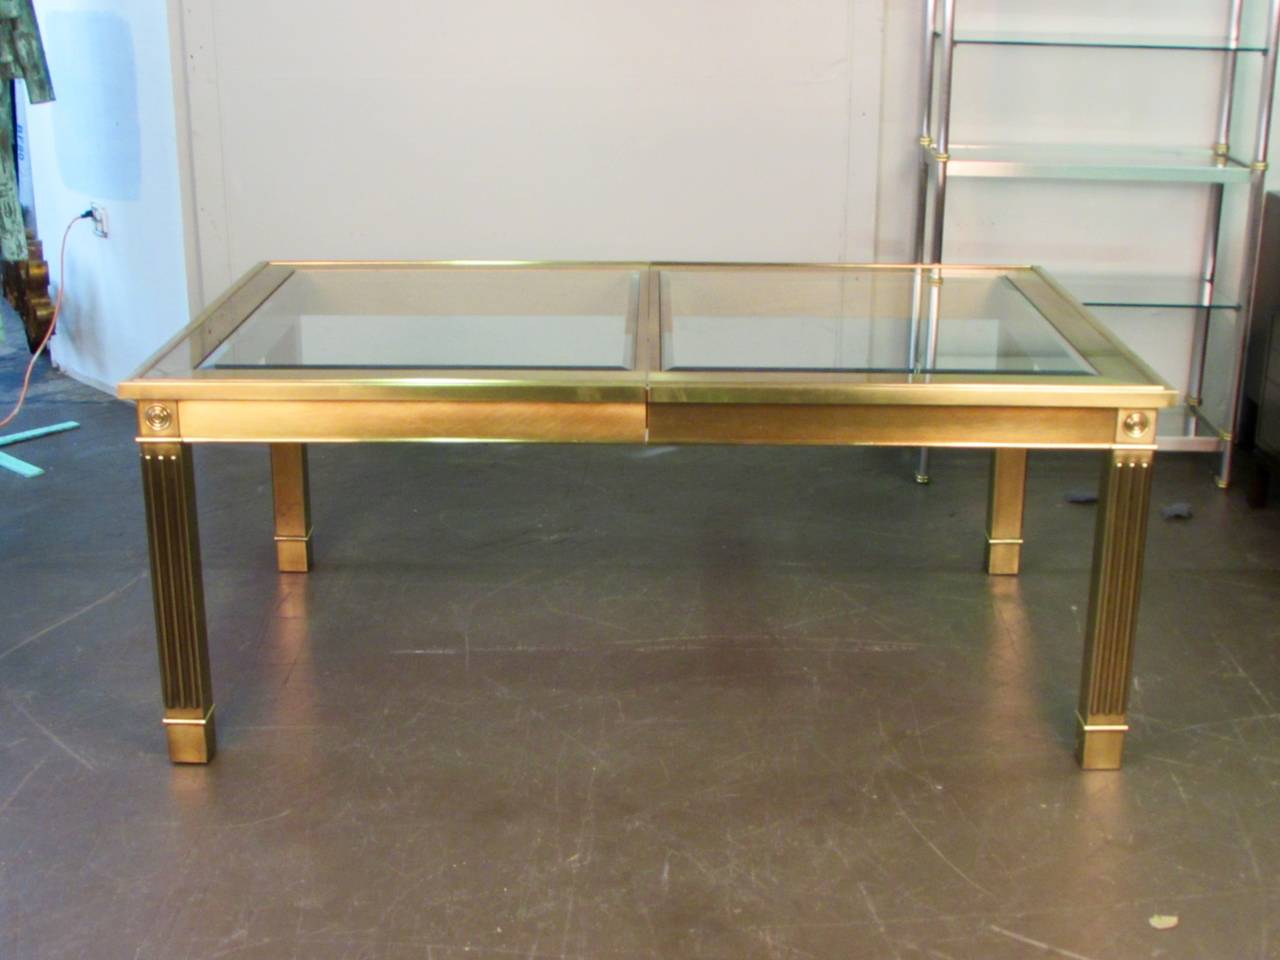 Striking brass and glass dining table with leaf by Mastercraft, 1970s

Dimensions: 74.5